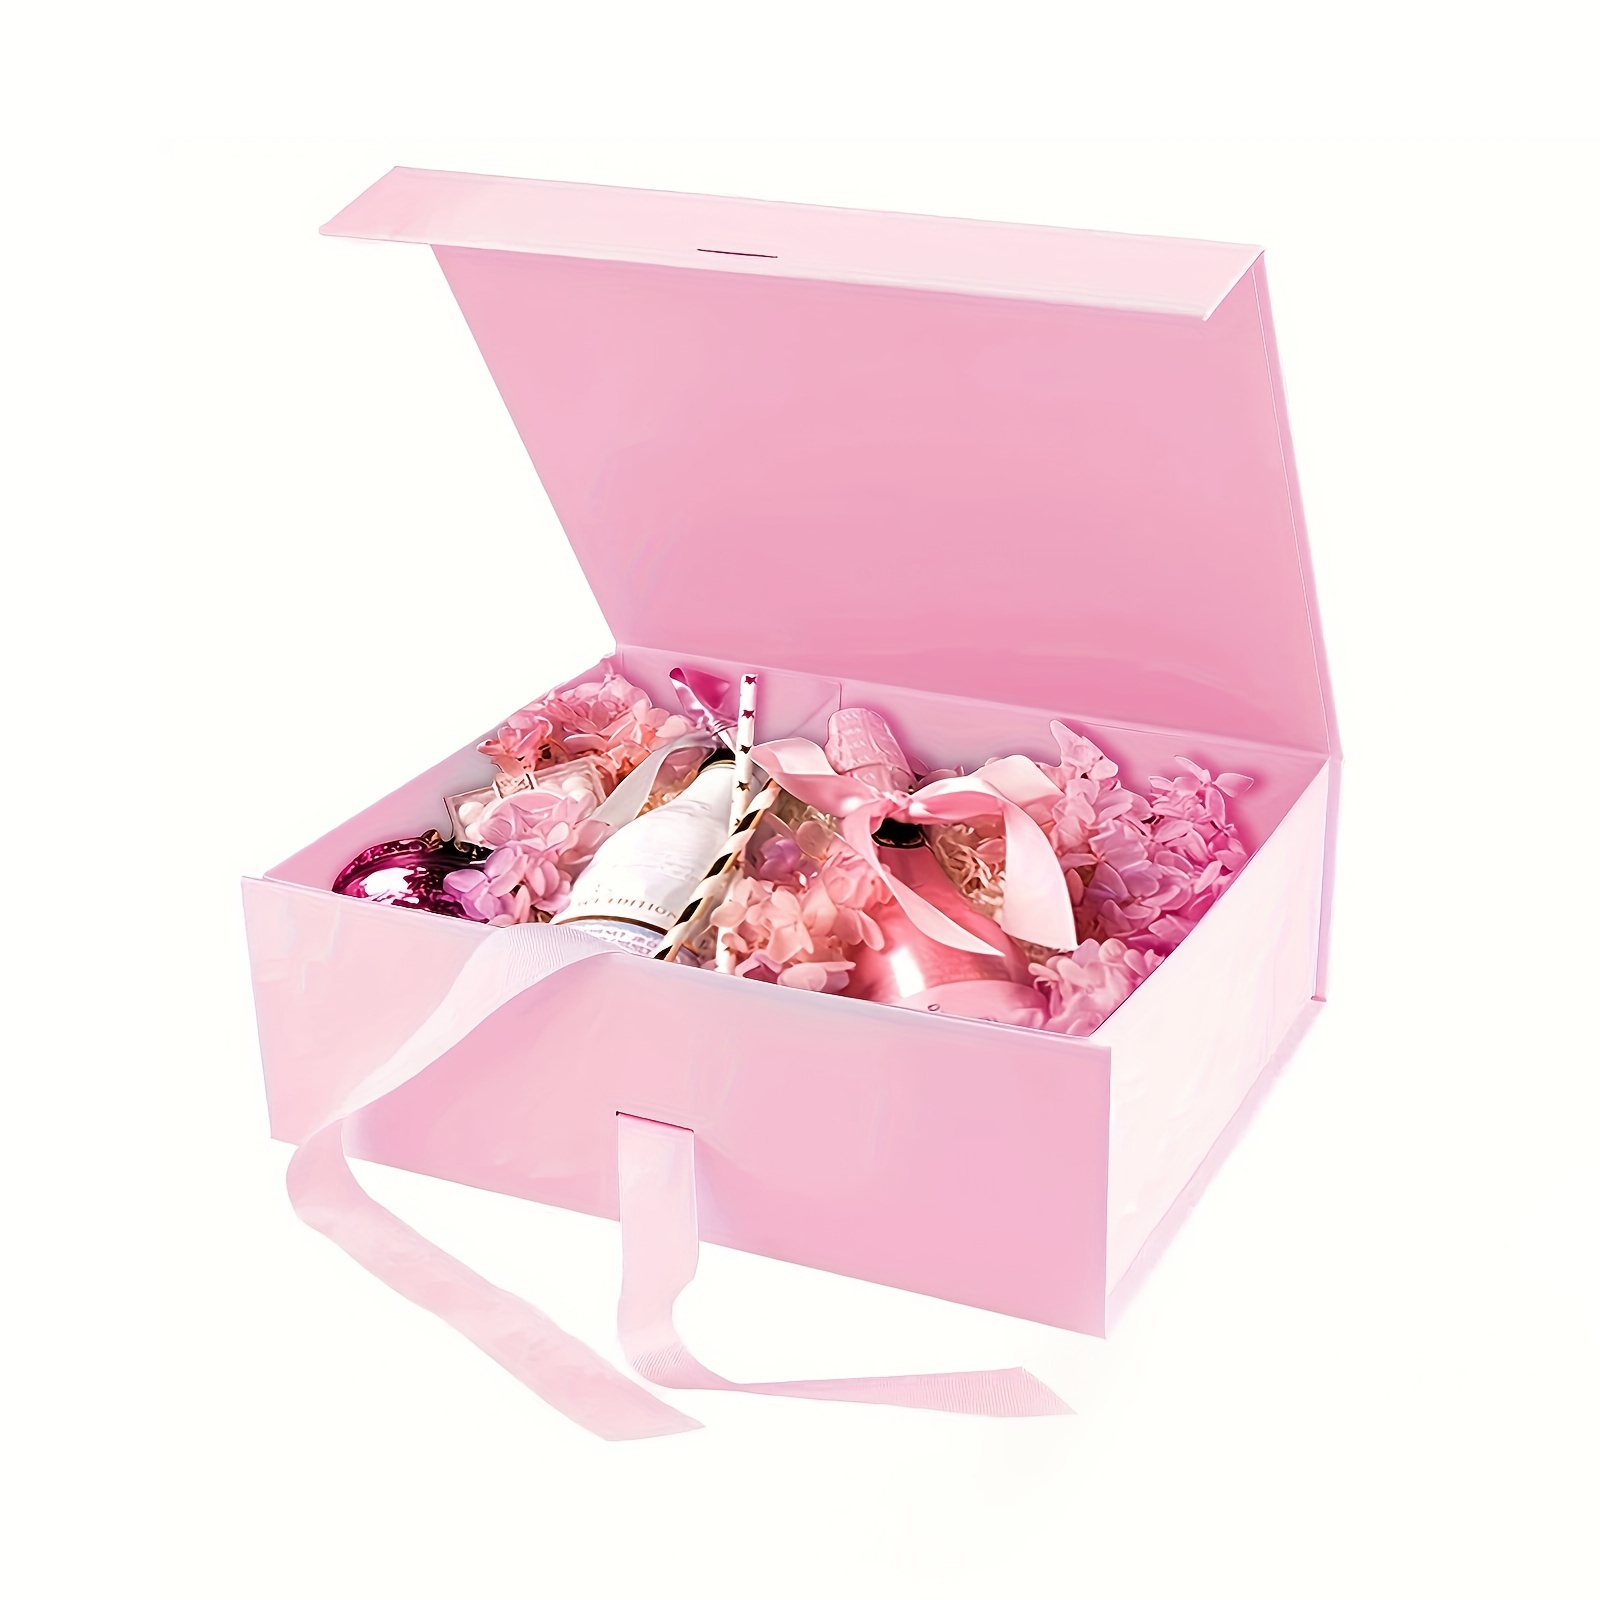 Large Gift Box, 8 Inches Pink Gift Boxes with Lids for Presents